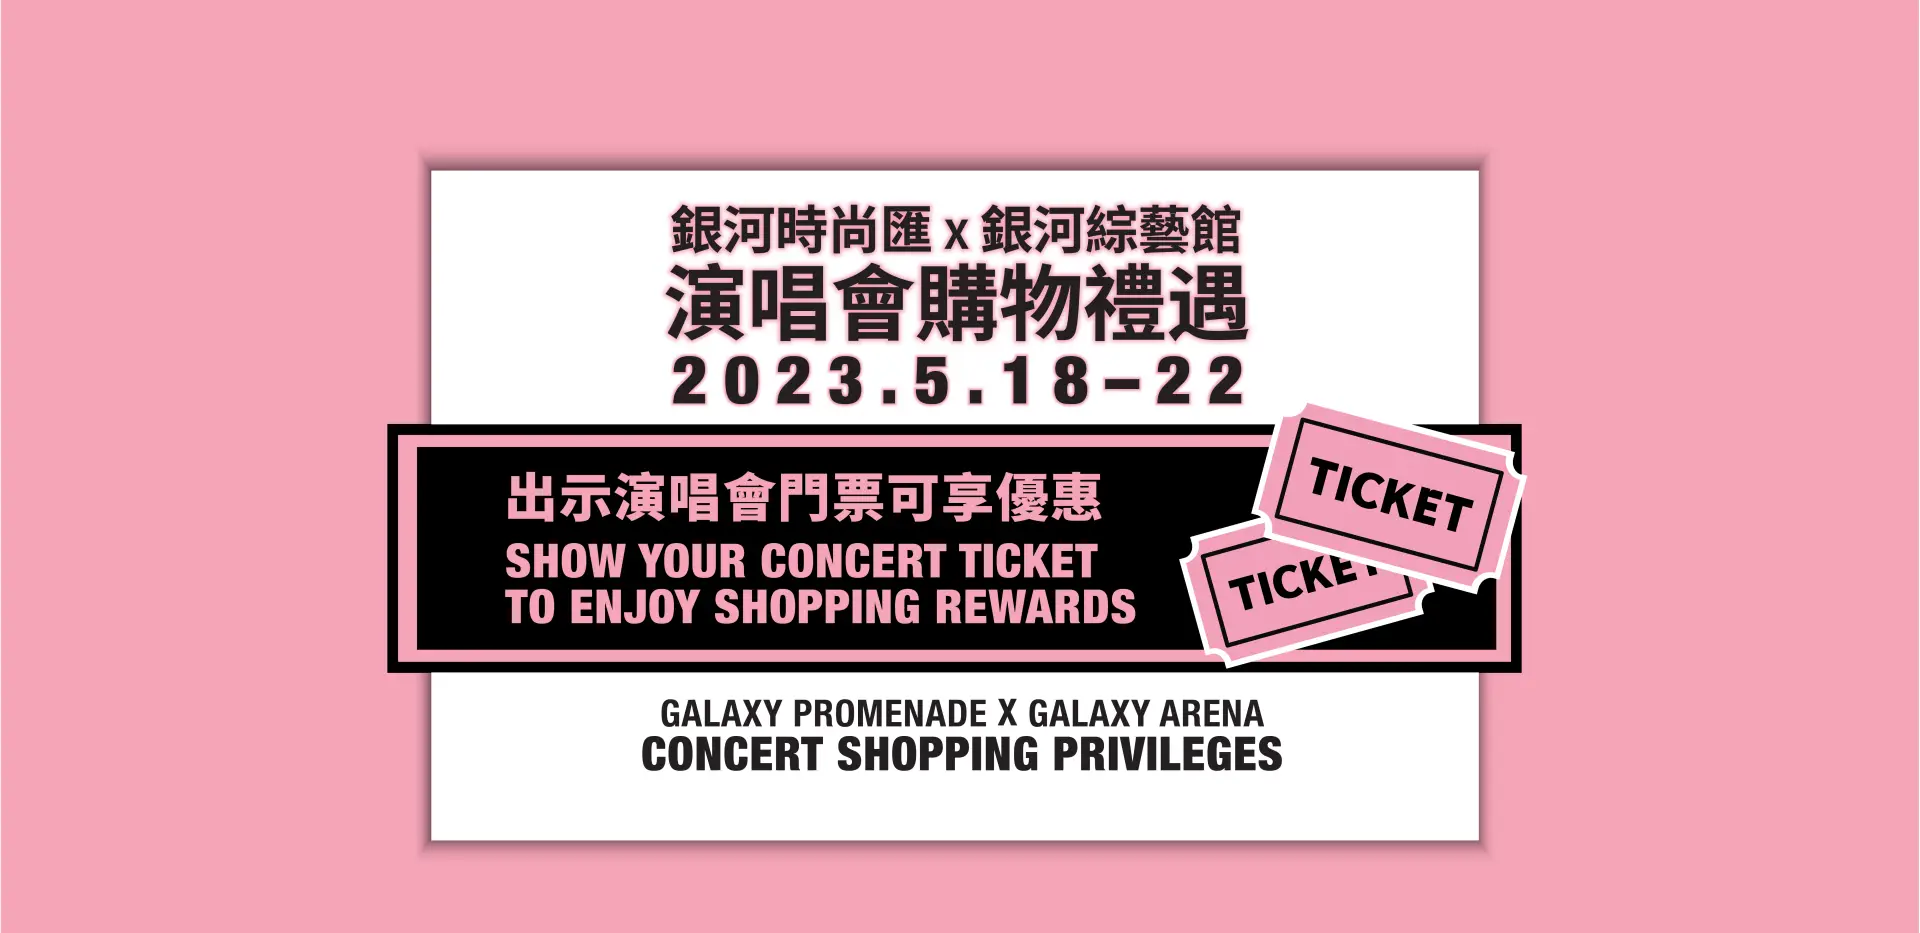 Galaxy Promenade X Galaxy Arena Concert Limited-time Shopping Privileges